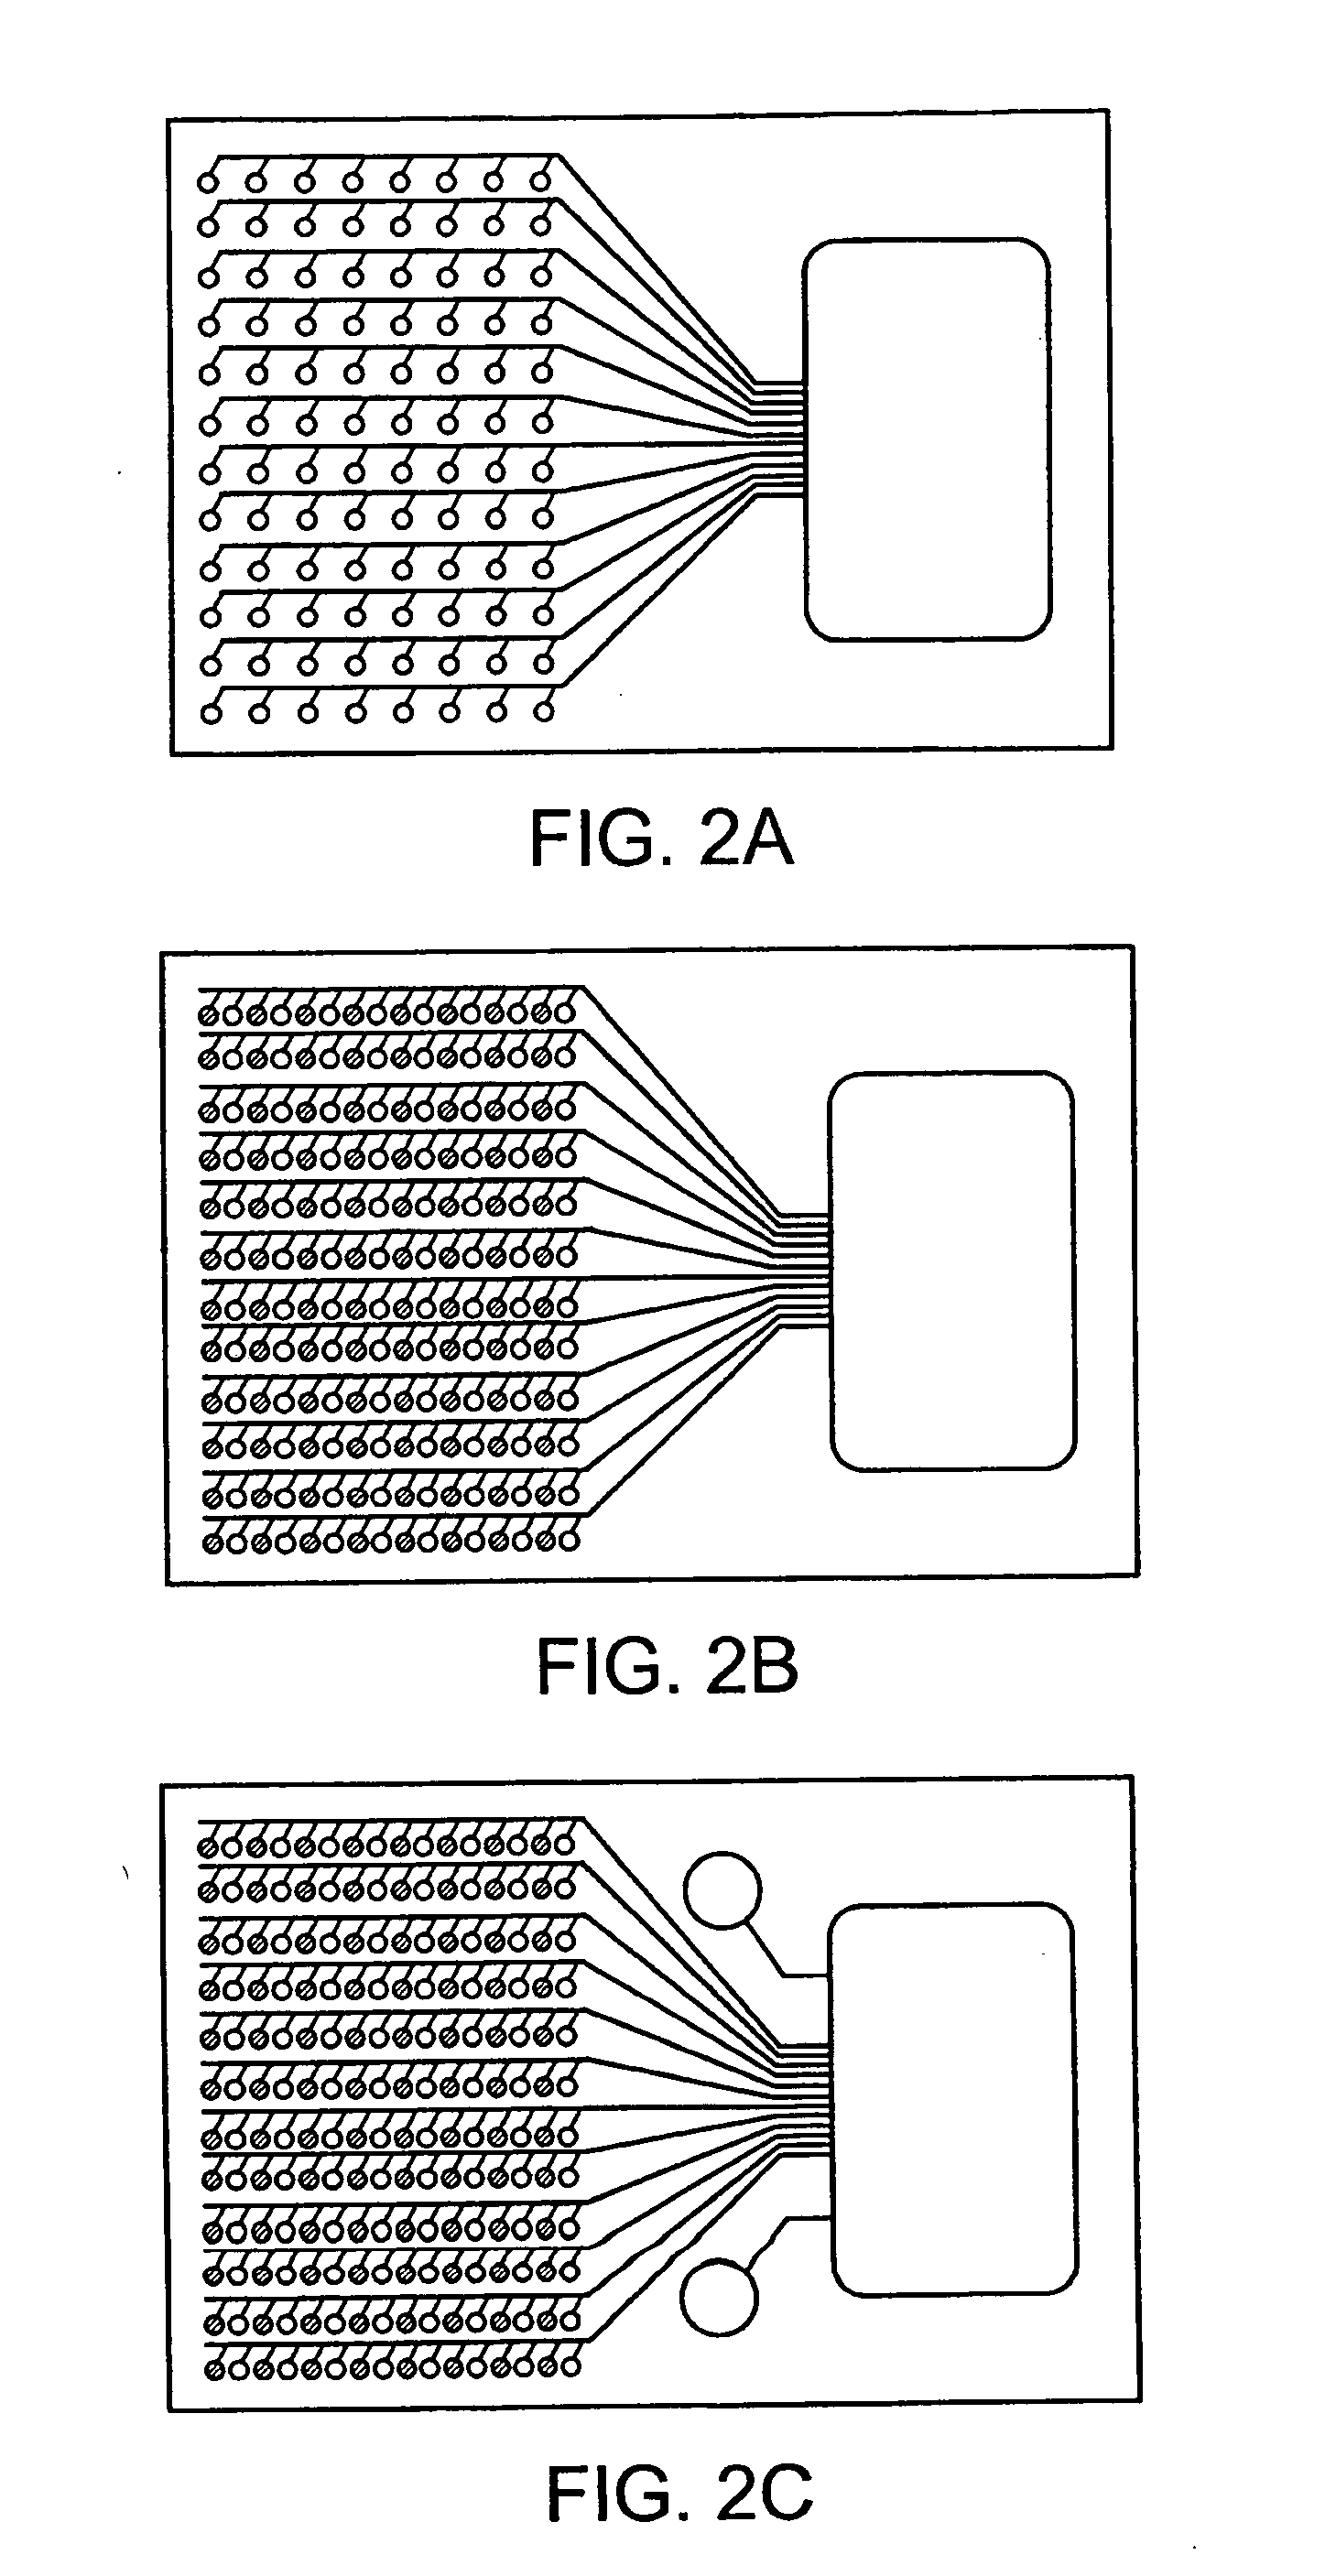 Systems and methods for rapidly changing the solution environment around sensors